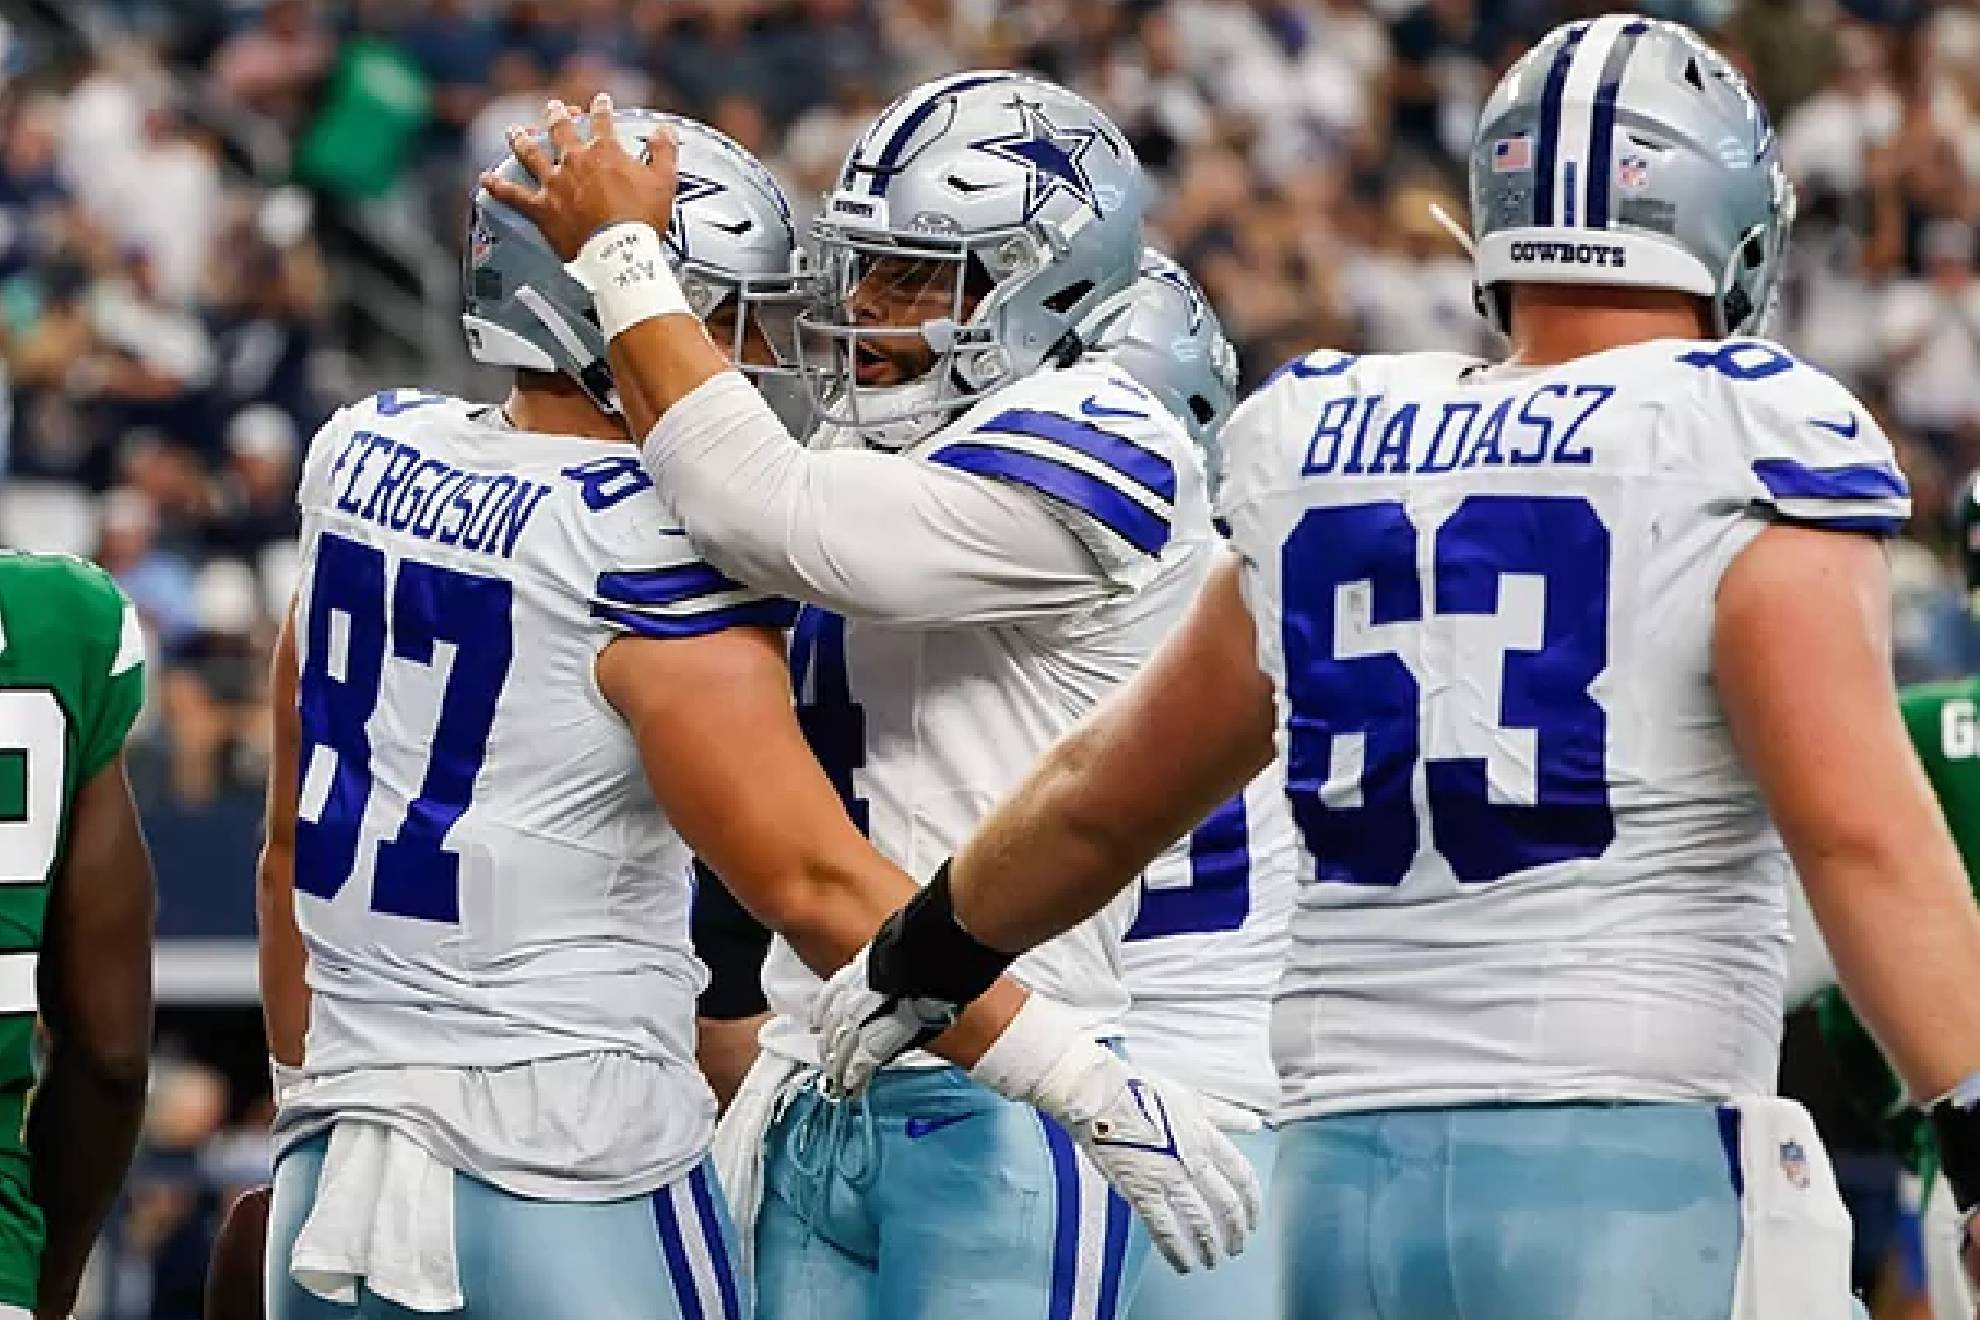 Dallas Cowboys named world's most valuable sports team, ahead of Real Madrid and New York Yankees